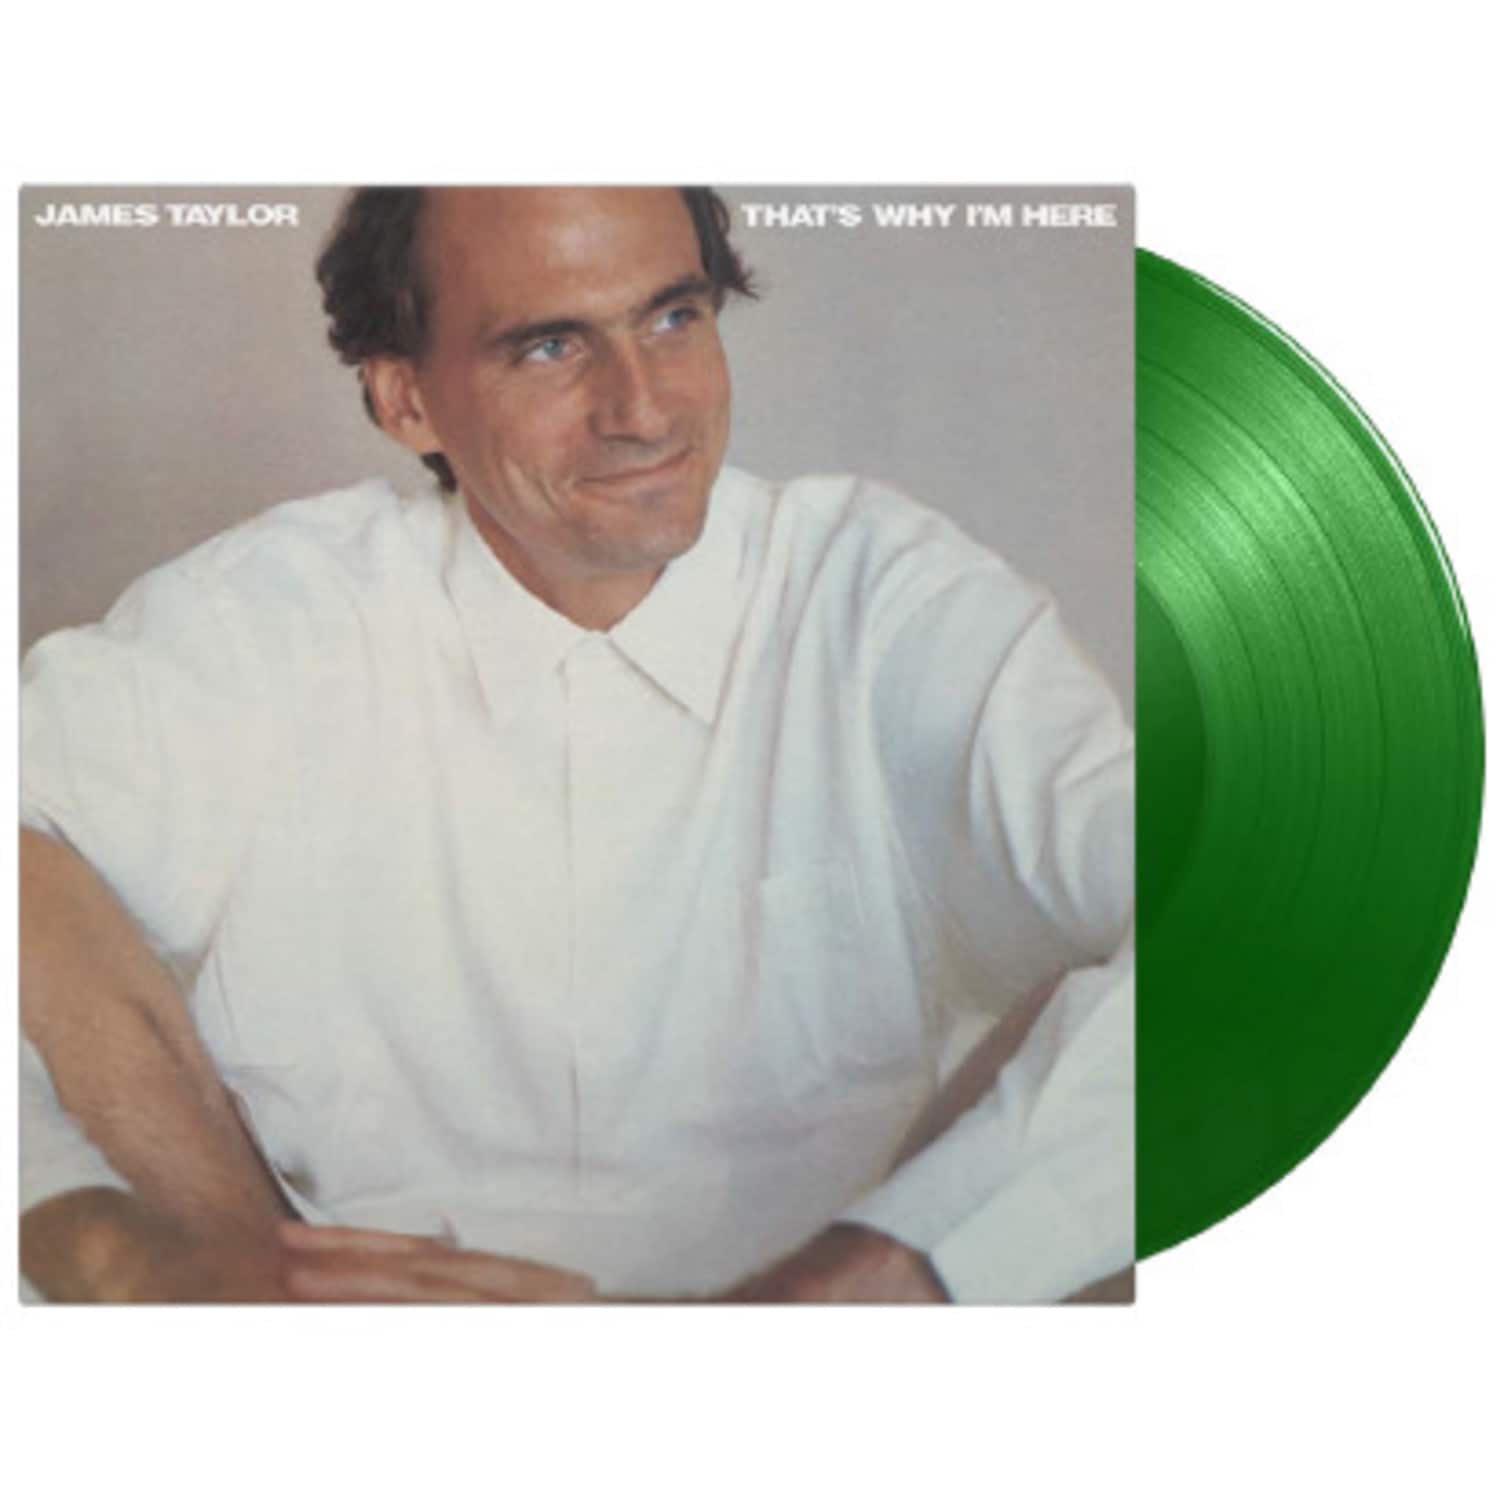 James Taylor - THAT S WHY I M HERE 